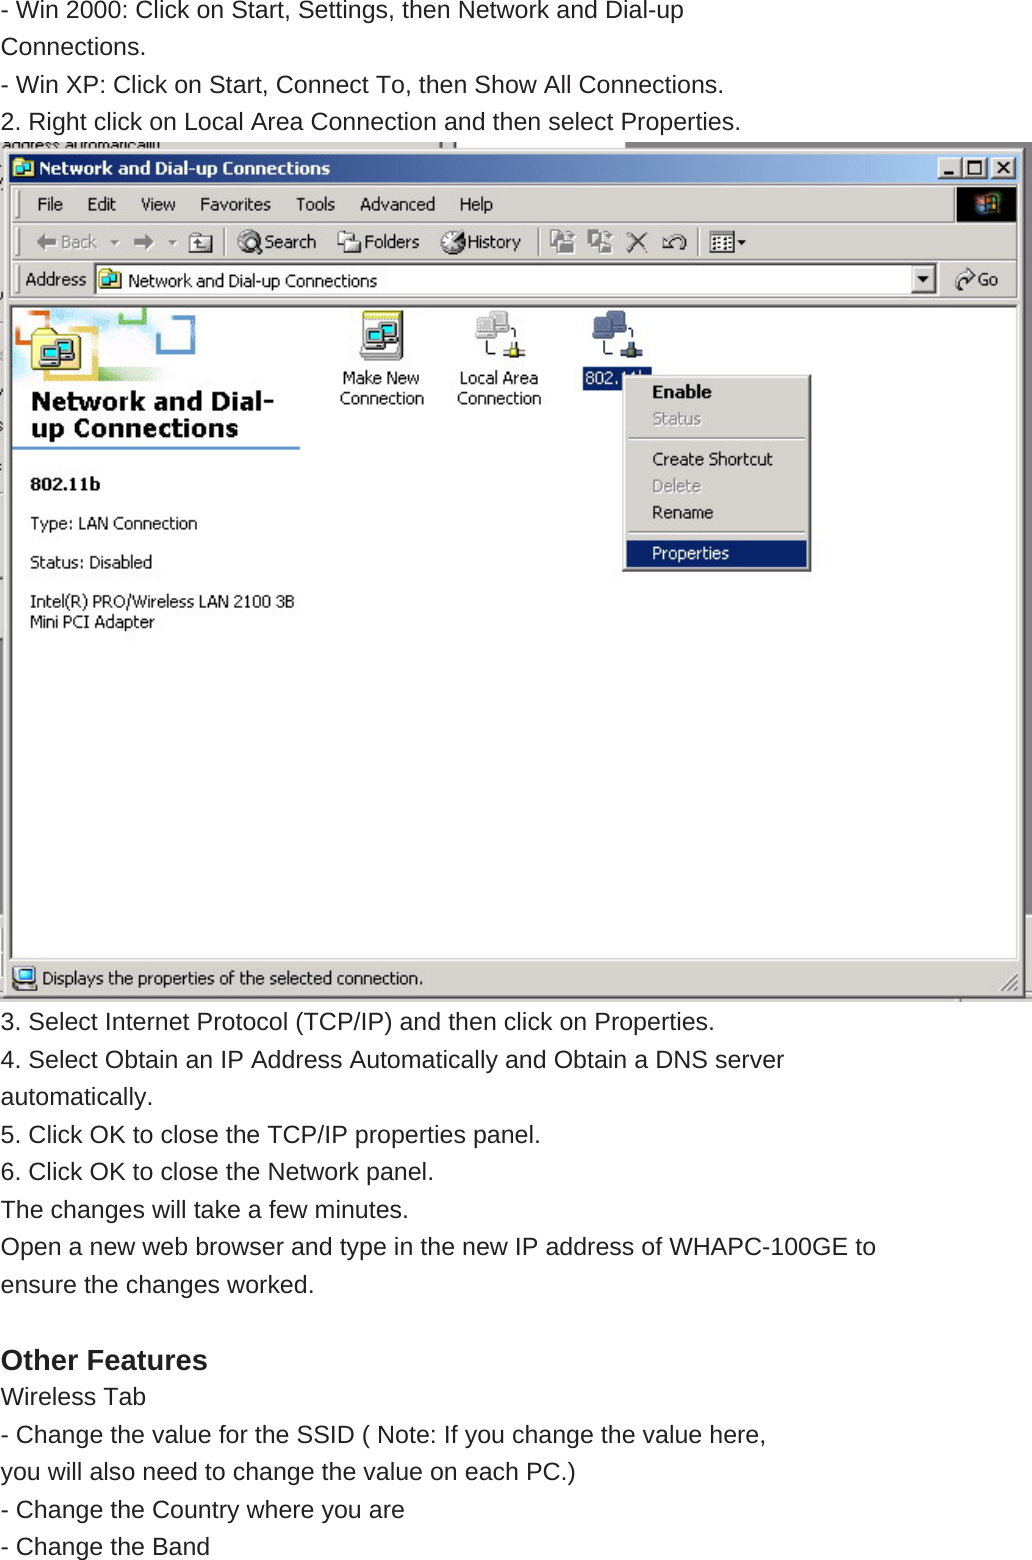  - Win 2000: Click on Start, Settings, then Network and Dial-up Connections. - Win XP: Click on Start, Connect To, then Show All Connections. 2. Right click on Local Area Connection and then select Properties.  3. Select Internet Protocol (TCP/IP) and then click on Properties. 4. Select Obtain an IP Address Automatically and Obtain a DNS server automatically. 5. Click OK to close the TCP/IP properties panel. 6. Click OK to close the Network panel. The changes will take a few minutes. Open a new web browser and type in the new IP address of WHAPC-100GE to ensure the changes worked.  Other Features Wireless Tab - Change the value for the SSID ( Note: If you change the value here, you will also need to change the value on each PC.) - Change the Country where you are - Change the Band 